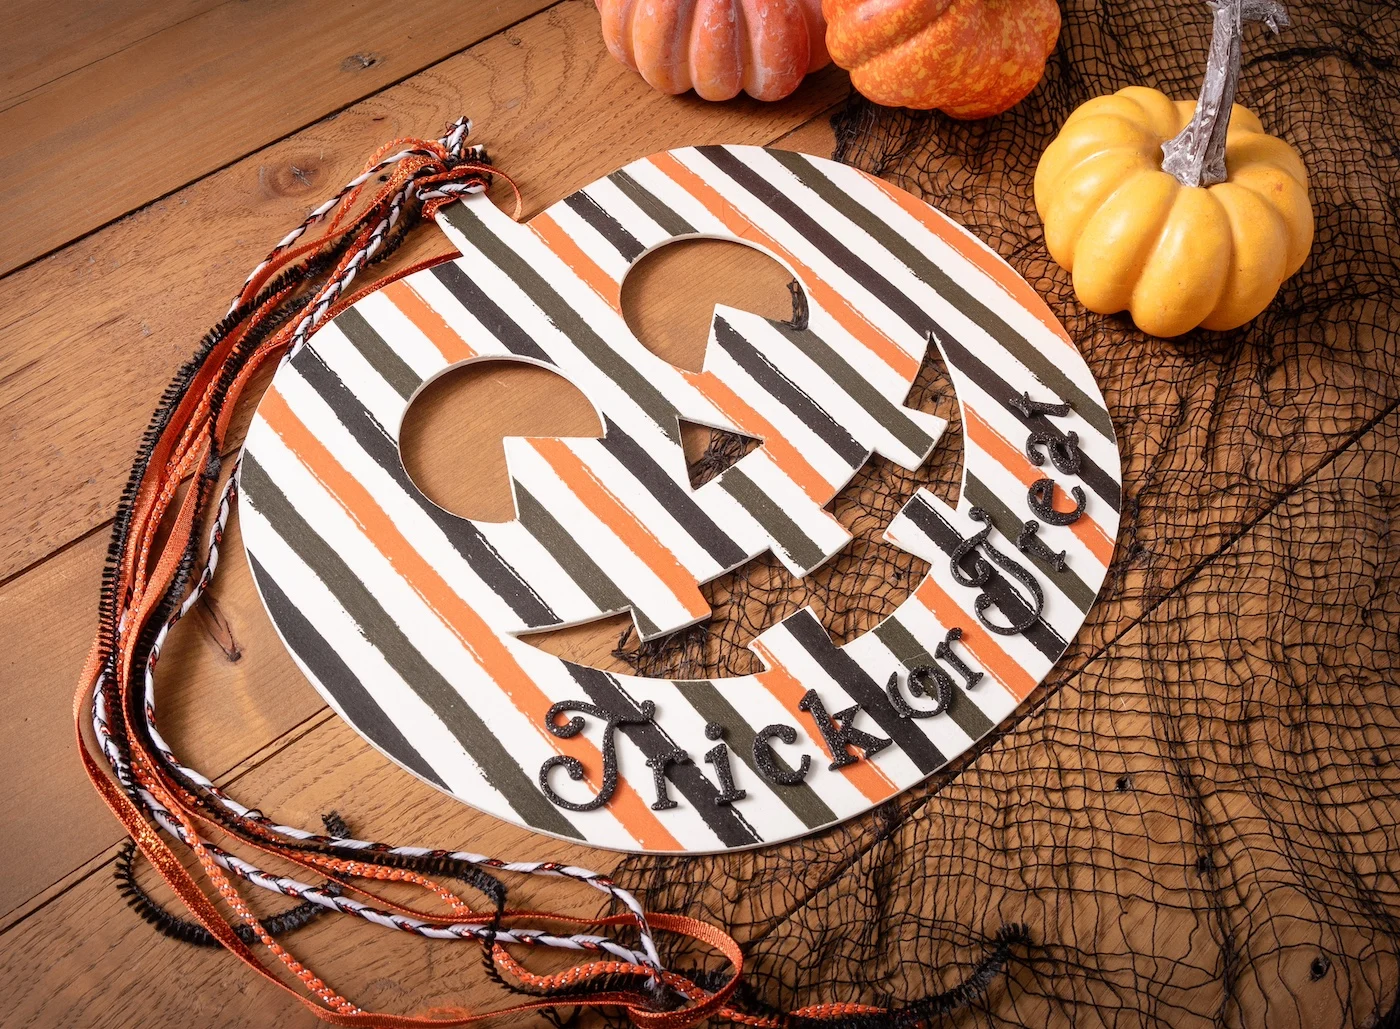 How to decorate a wood Dollar Tree pumpkin